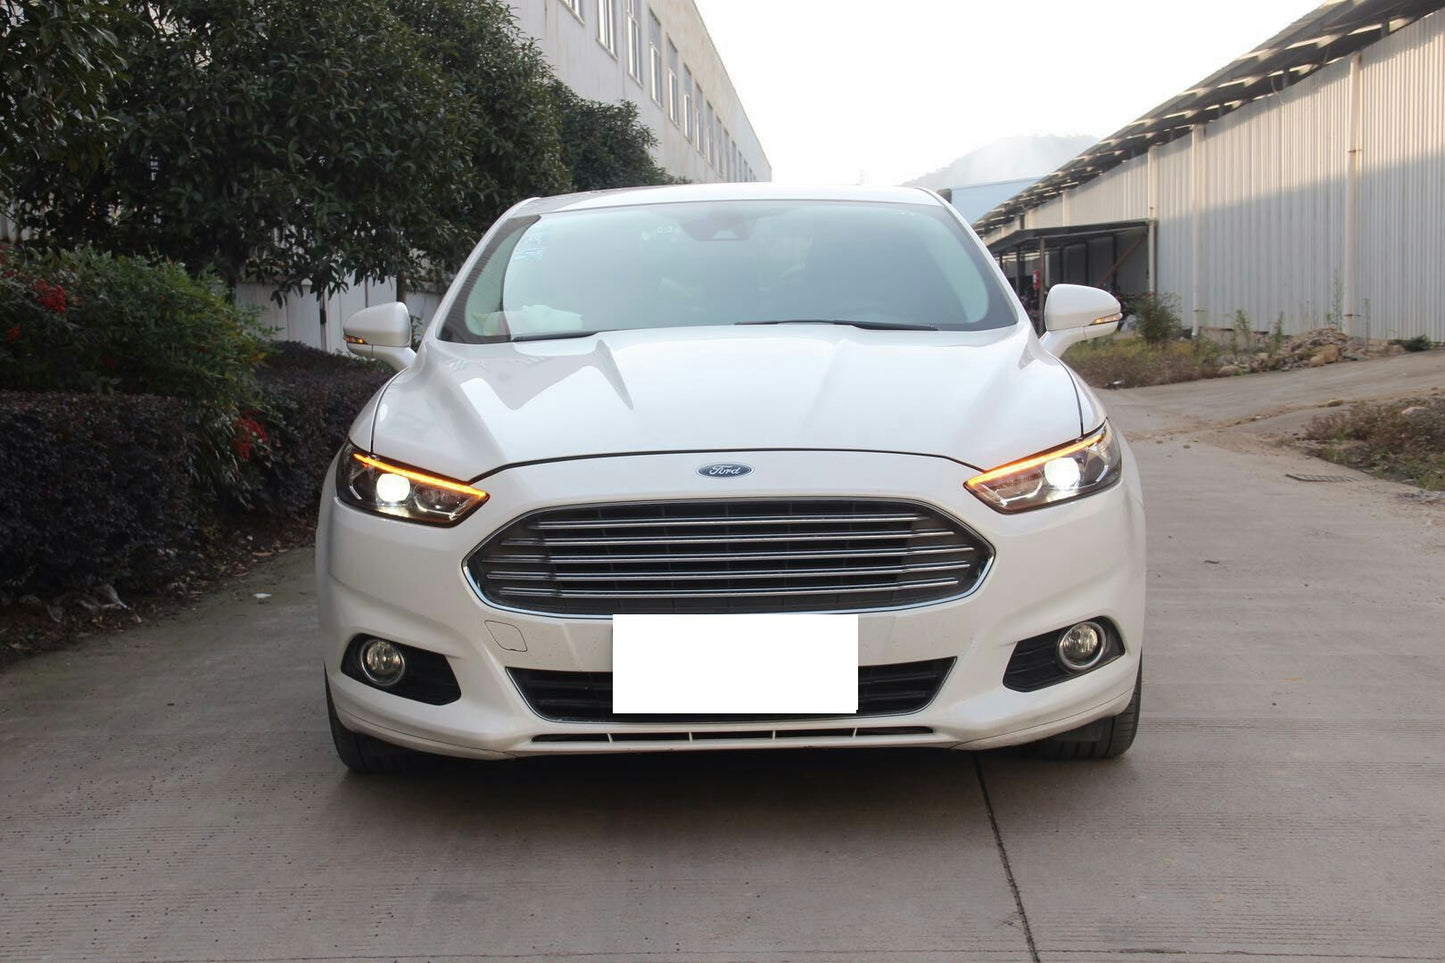 Projector lens LED headlights for 2013-2016 Fusion